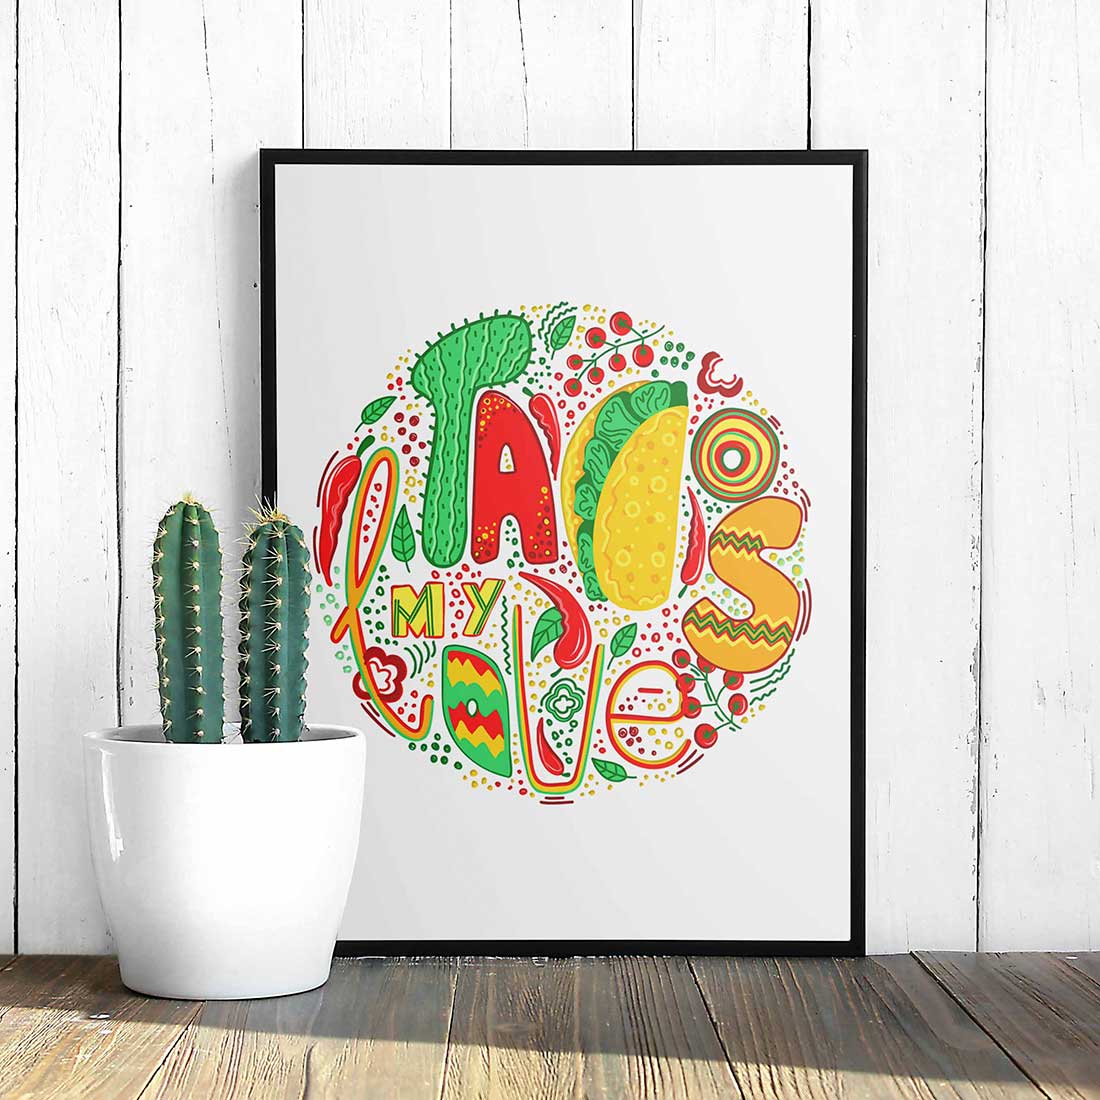 Stylish minimalistic poster with a colorful taco graphic.